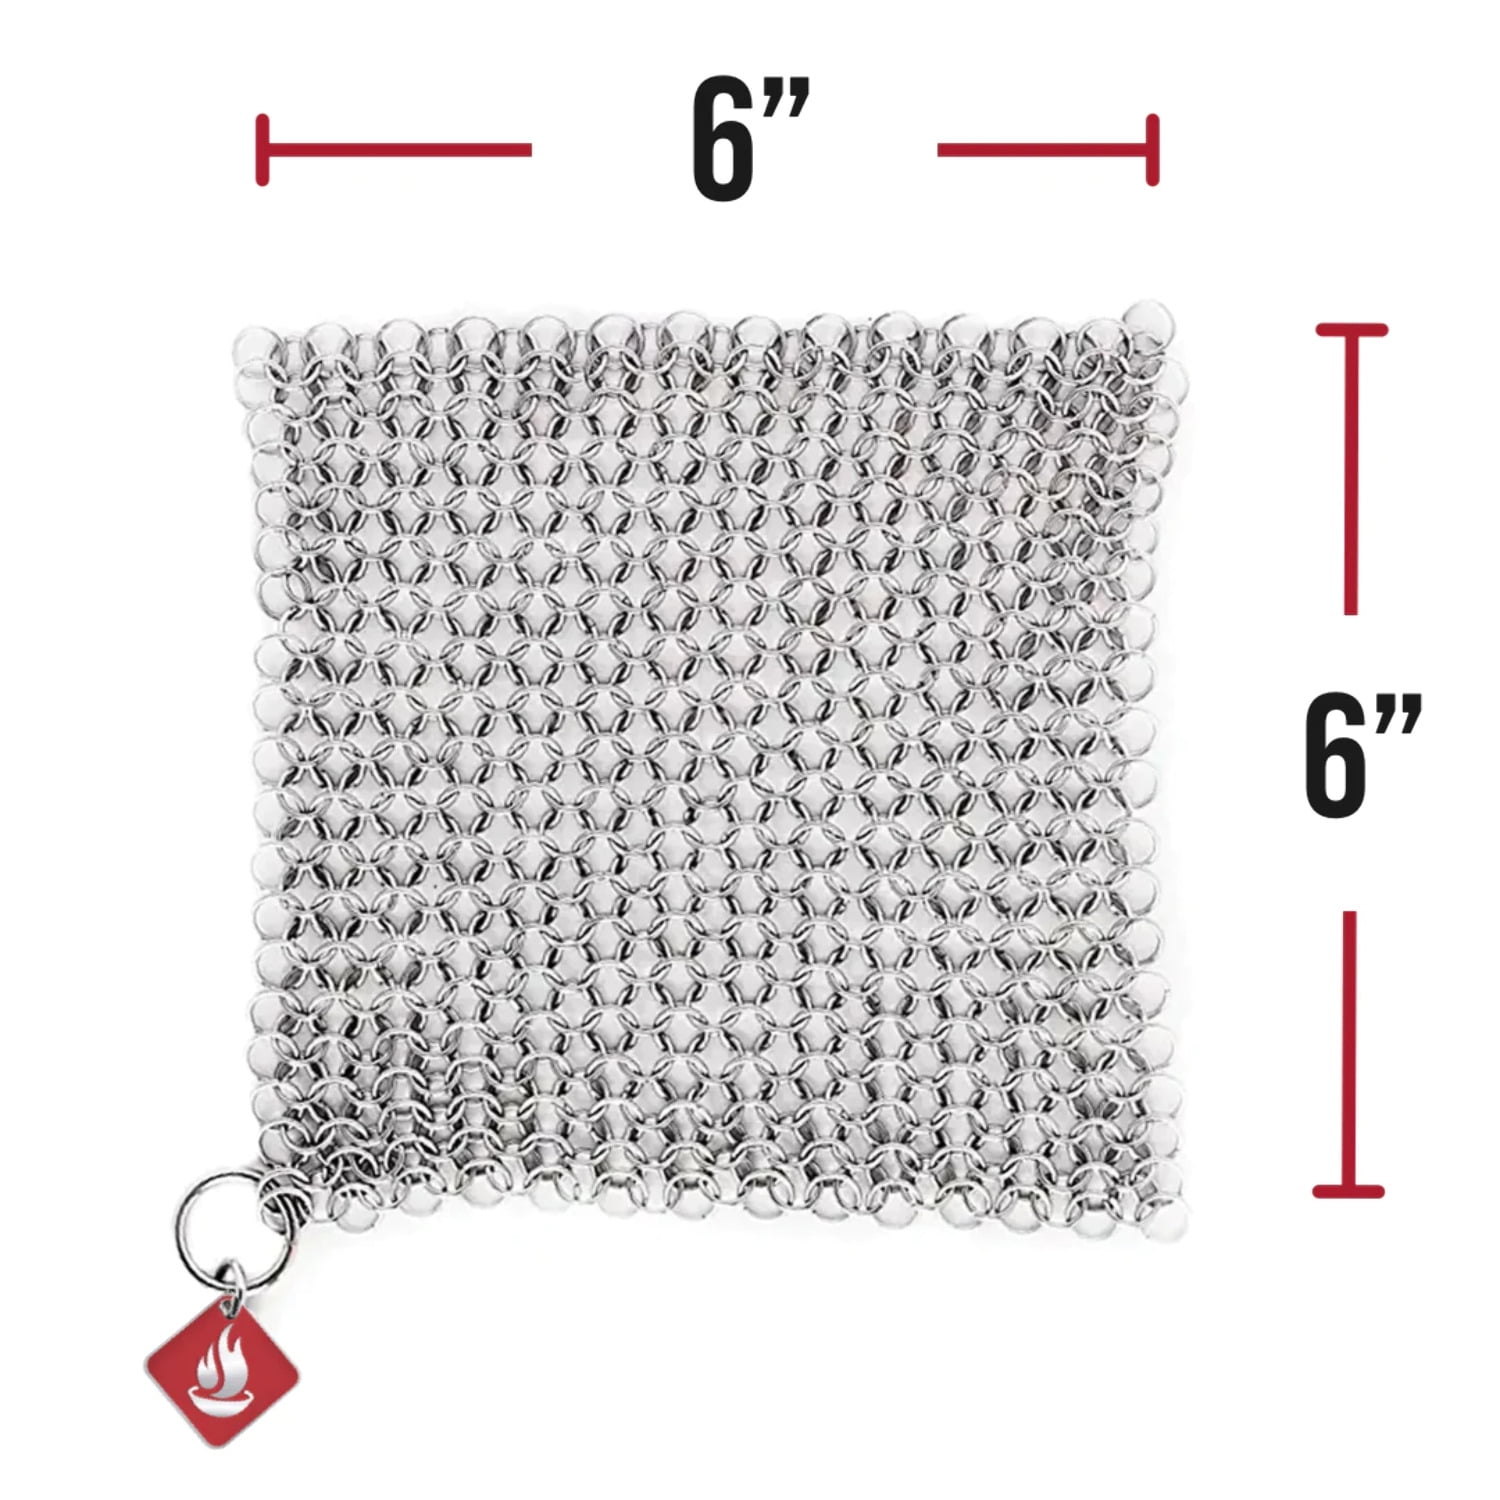 Knapp Made Products Chain Mail Dish Cloth